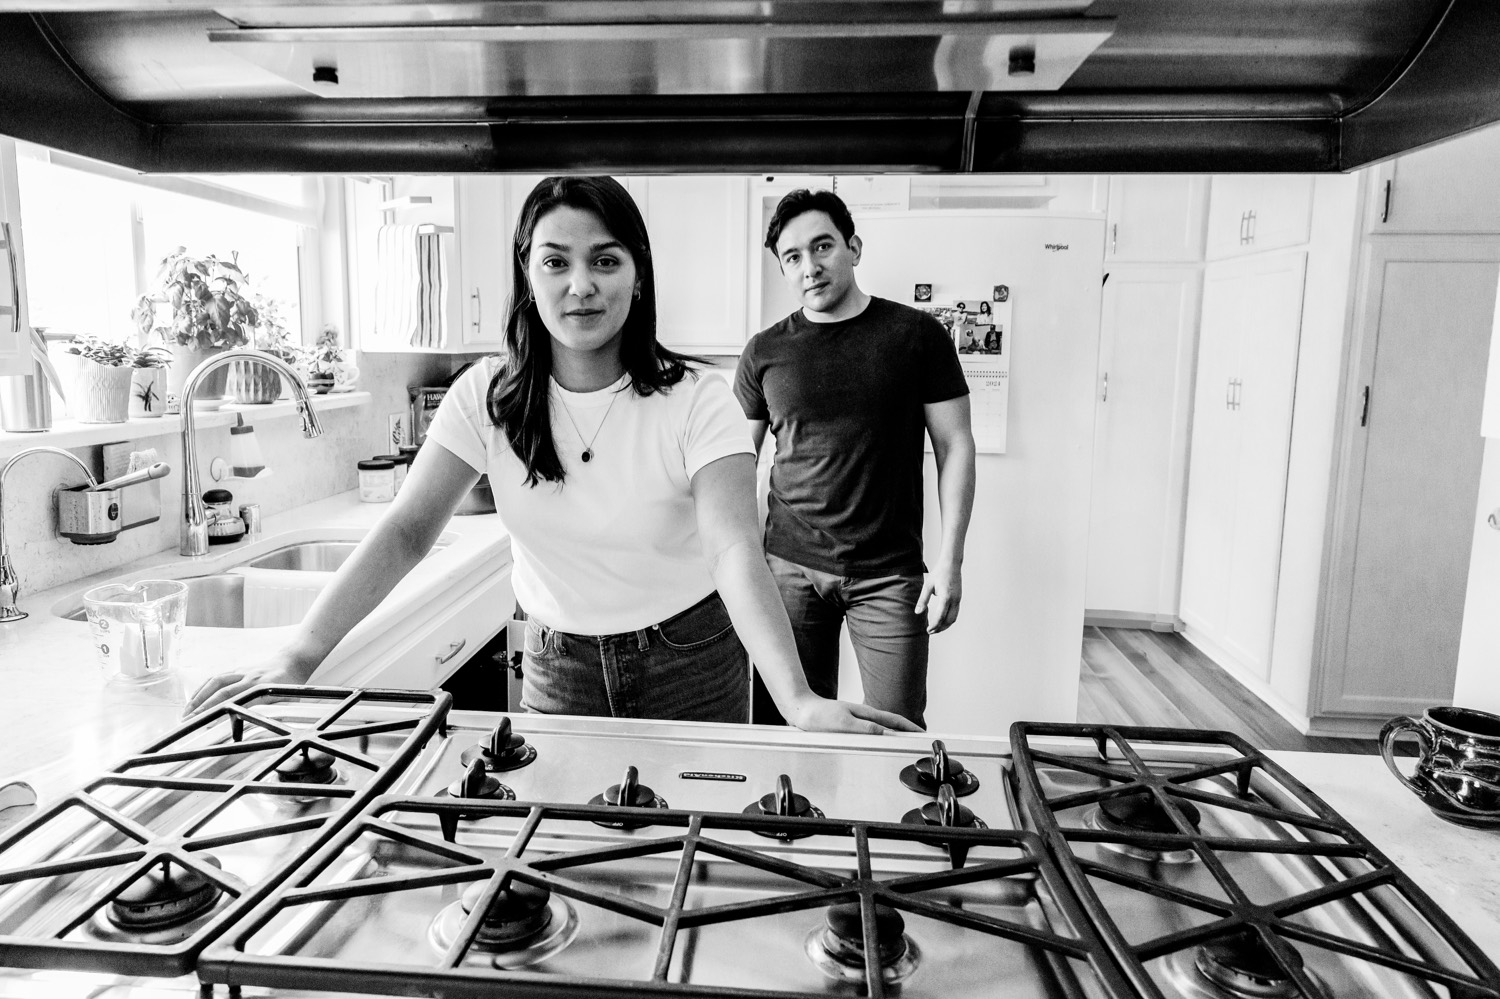 engagement photos in the kitchen; lifestyle photography